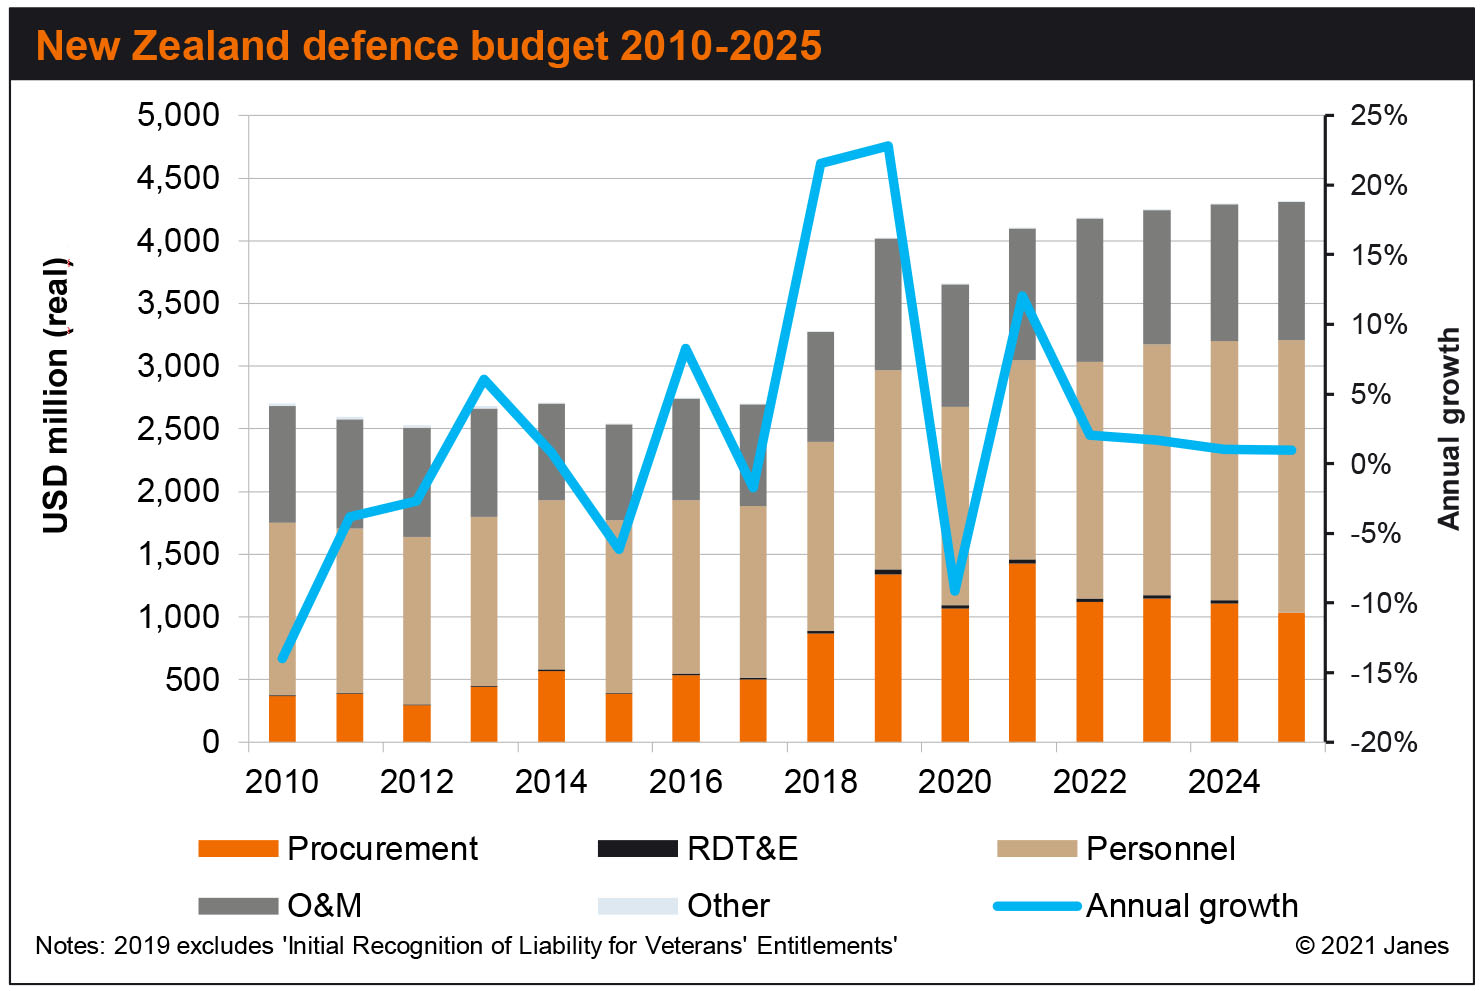 Janes forecasts moderate growth for New Zealand’s defence budget over the next few years. (Janes Defence Budgets)